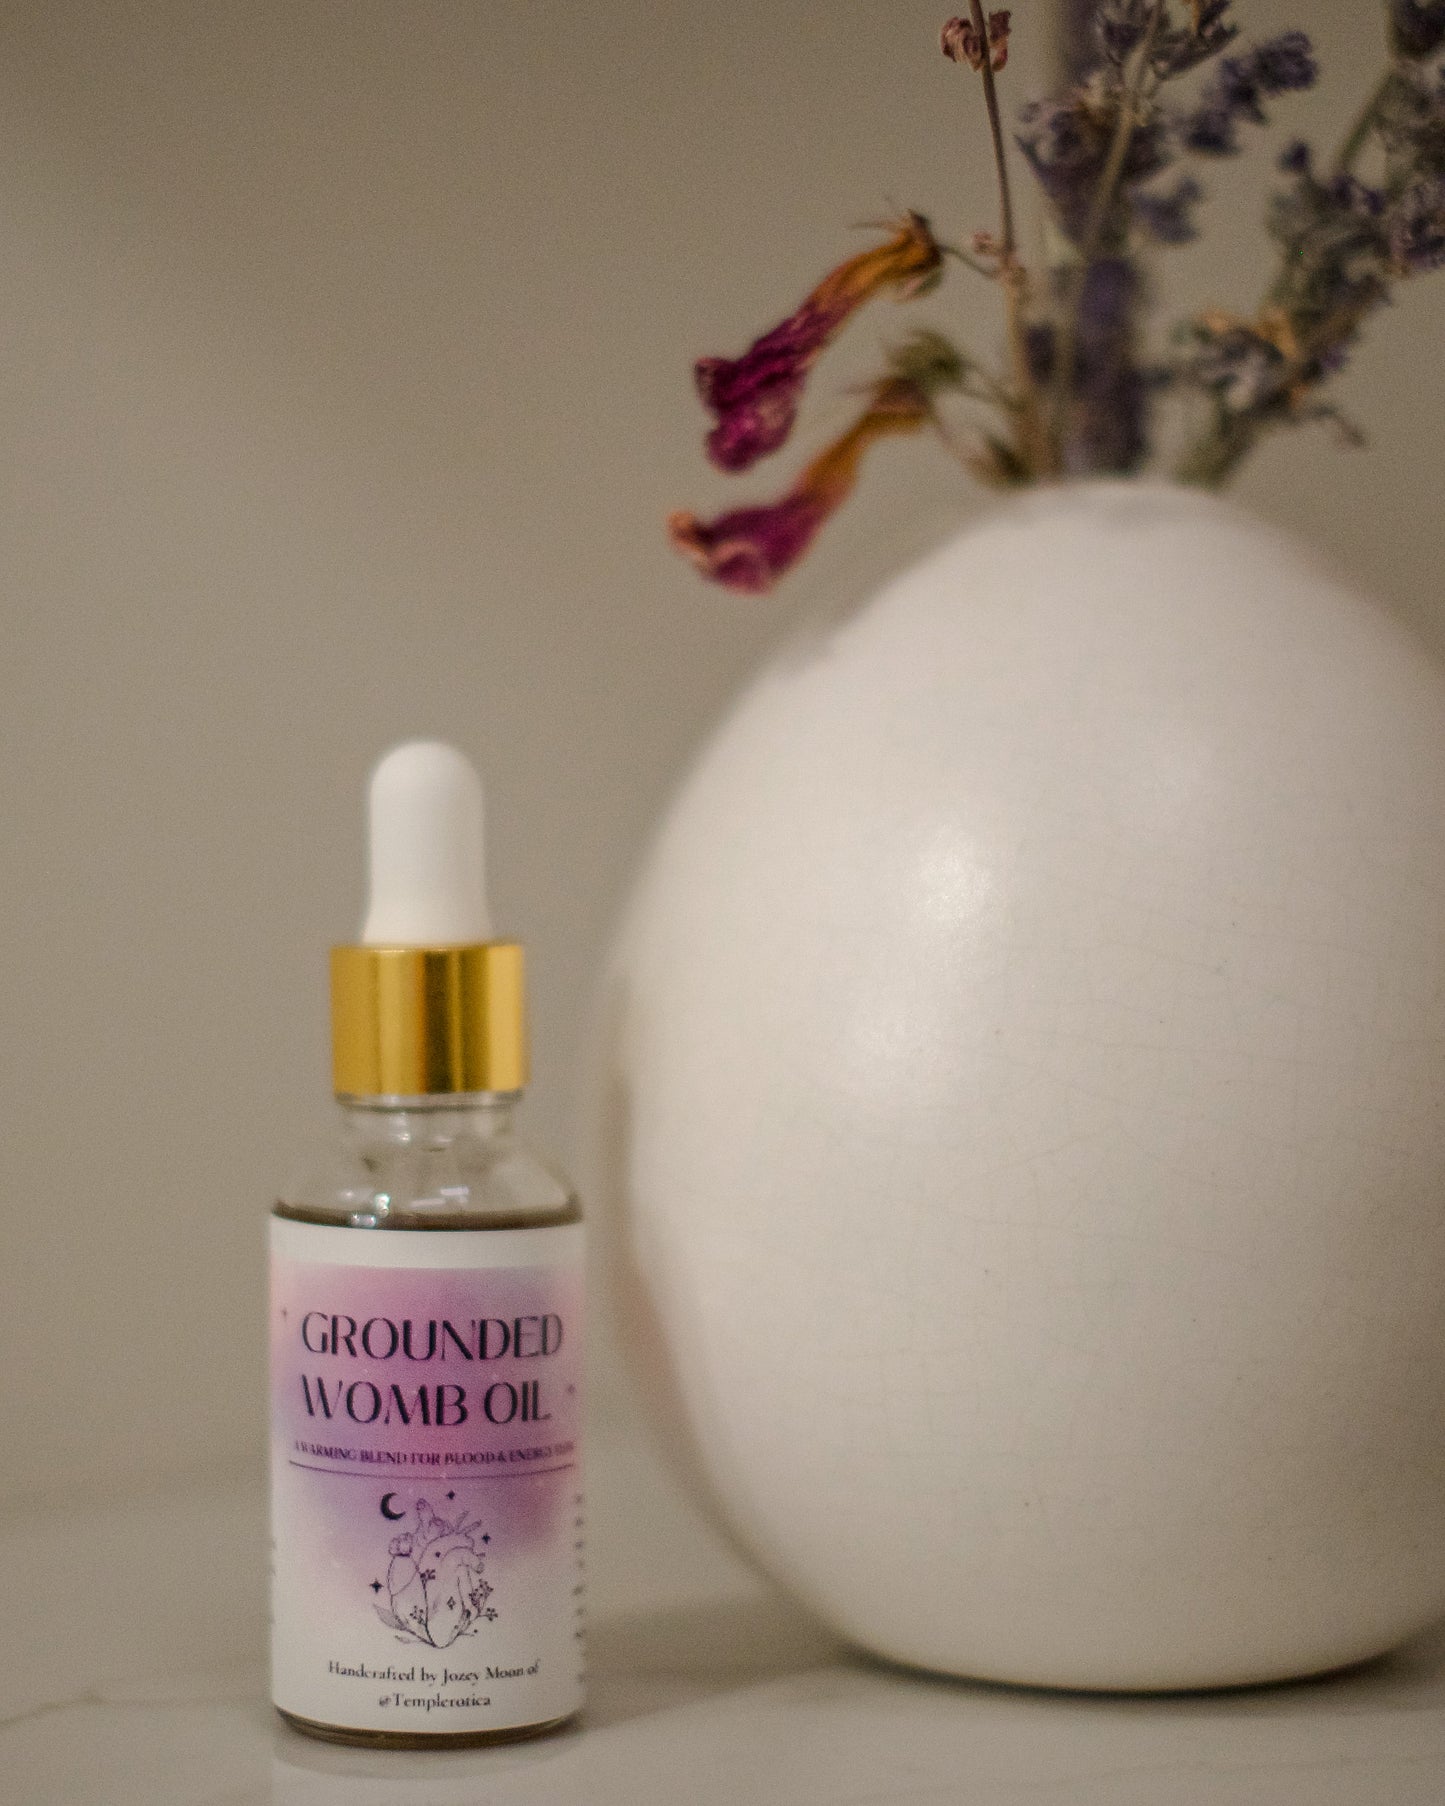 Grounded Womb Oil